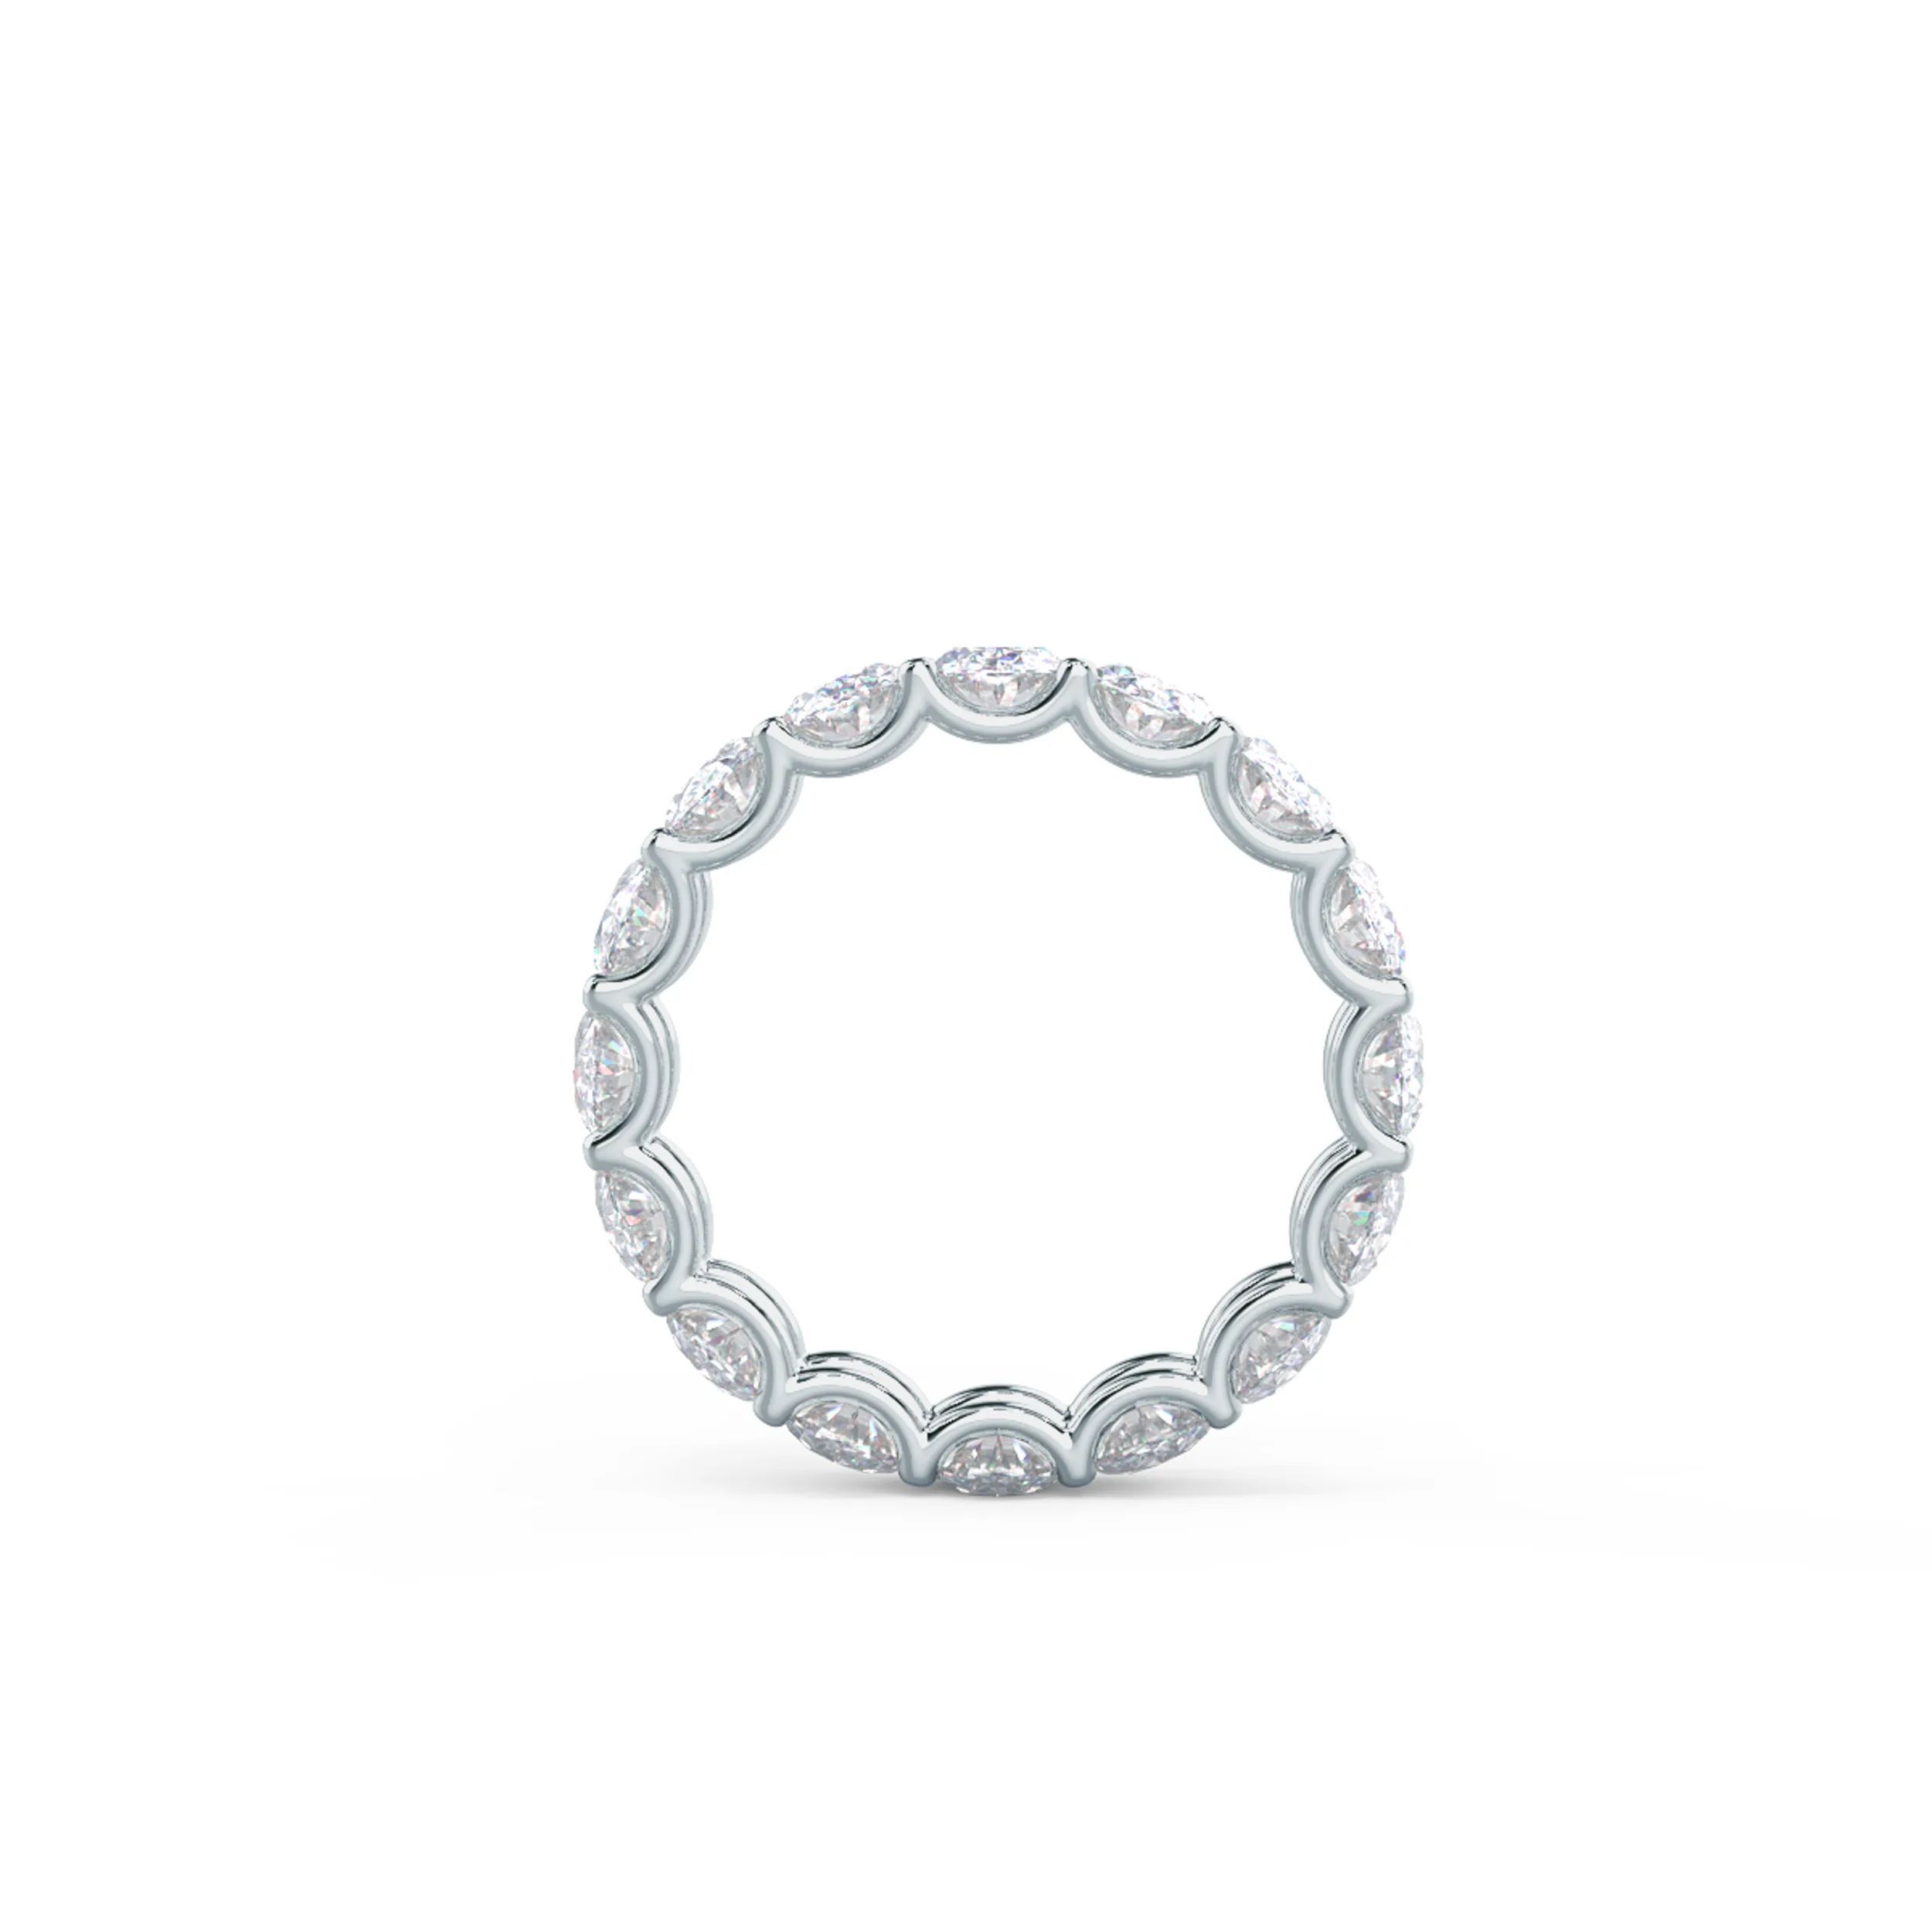 3.8 Carat Diamonds set in 18kt White Gold Oval French U Eternity Band (Profile View)